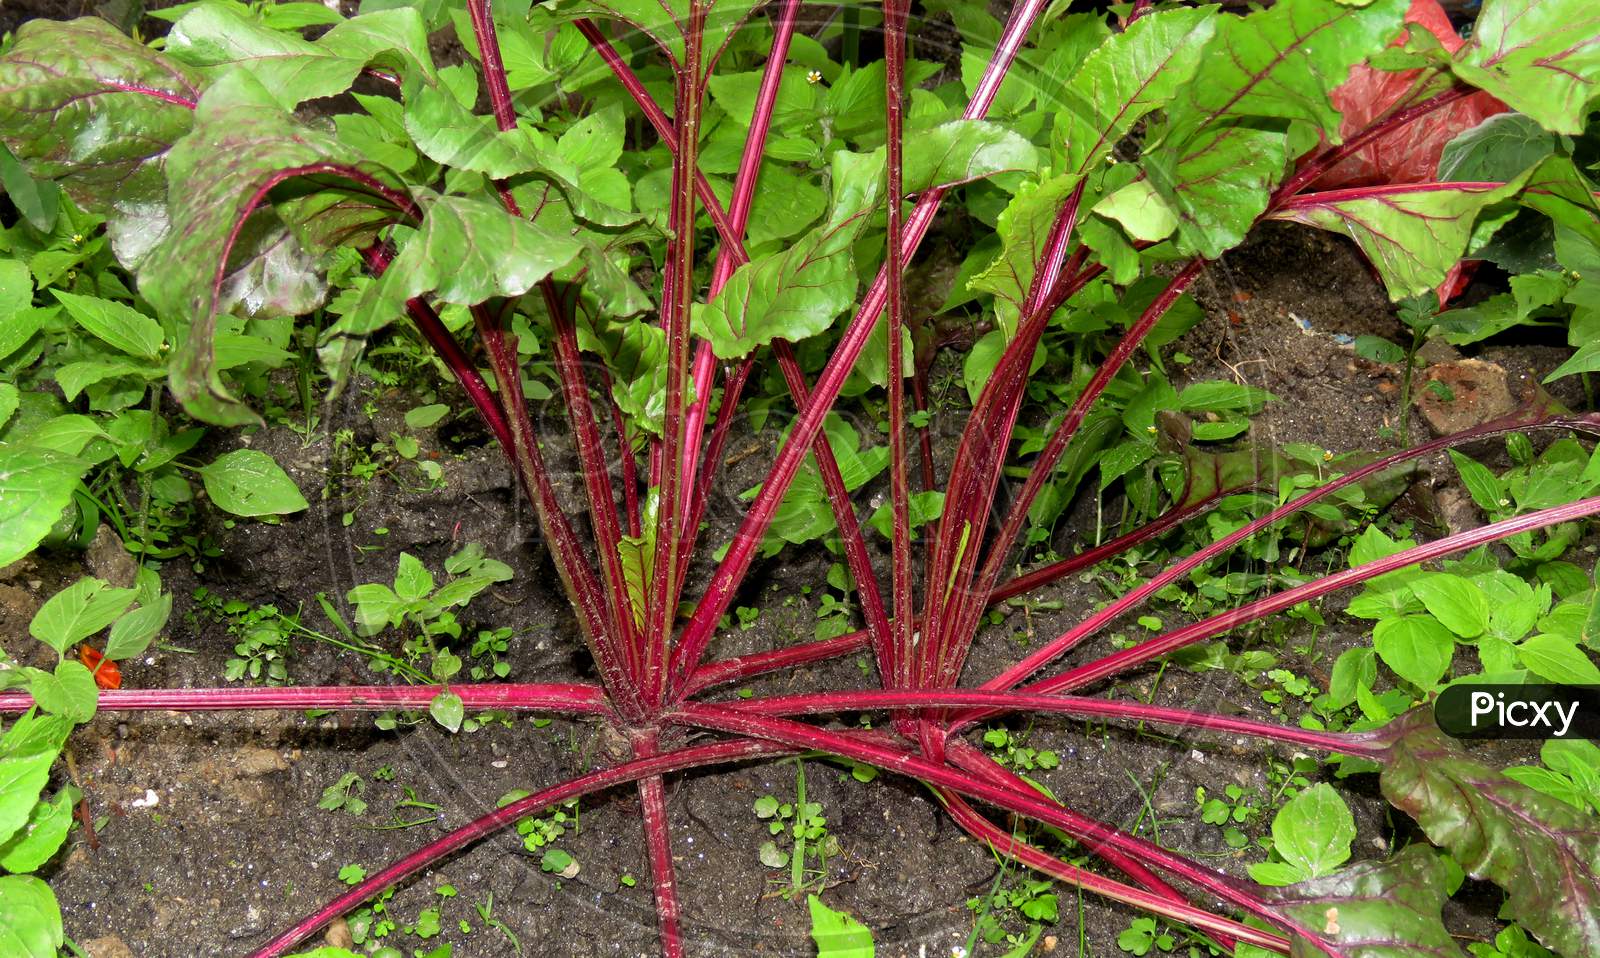 Beetroot plant or beets Plant ,red and green leaves in the garden.